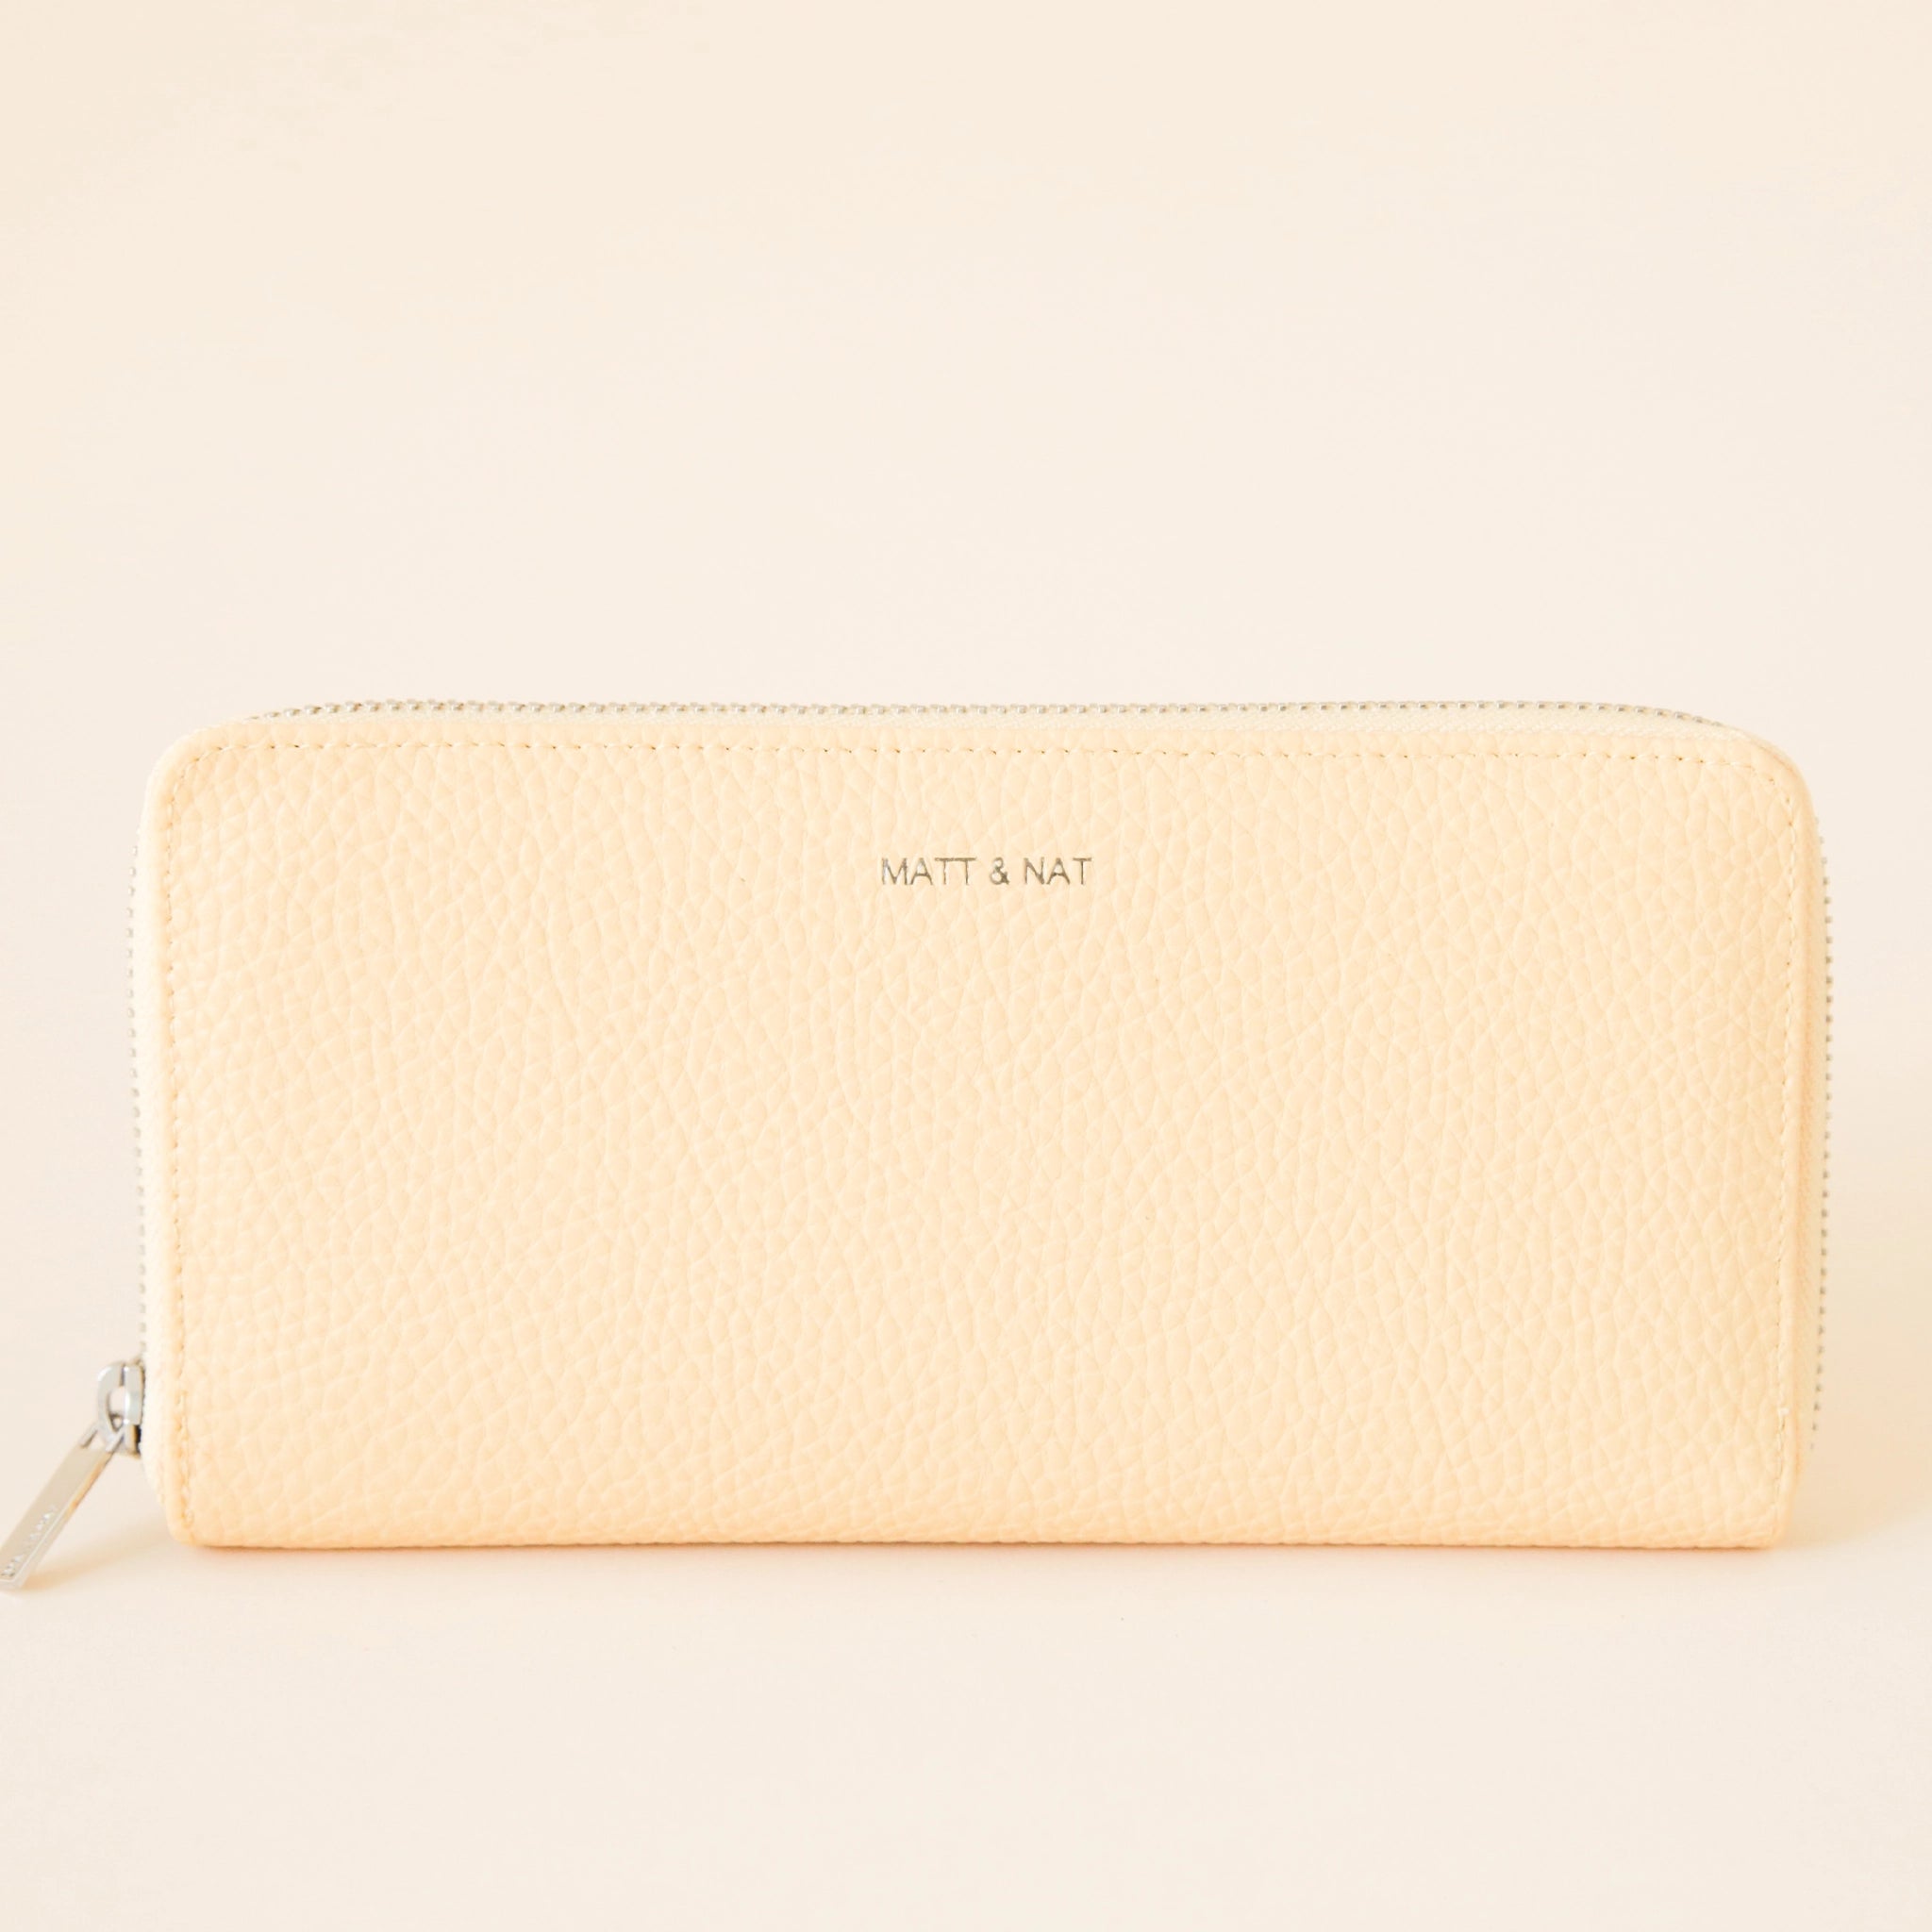 On a cream background is a light yellow zip wallet with silver detailing and &quot;Matt &amp; Nat&quot; written tiny on the front of the wallet. 